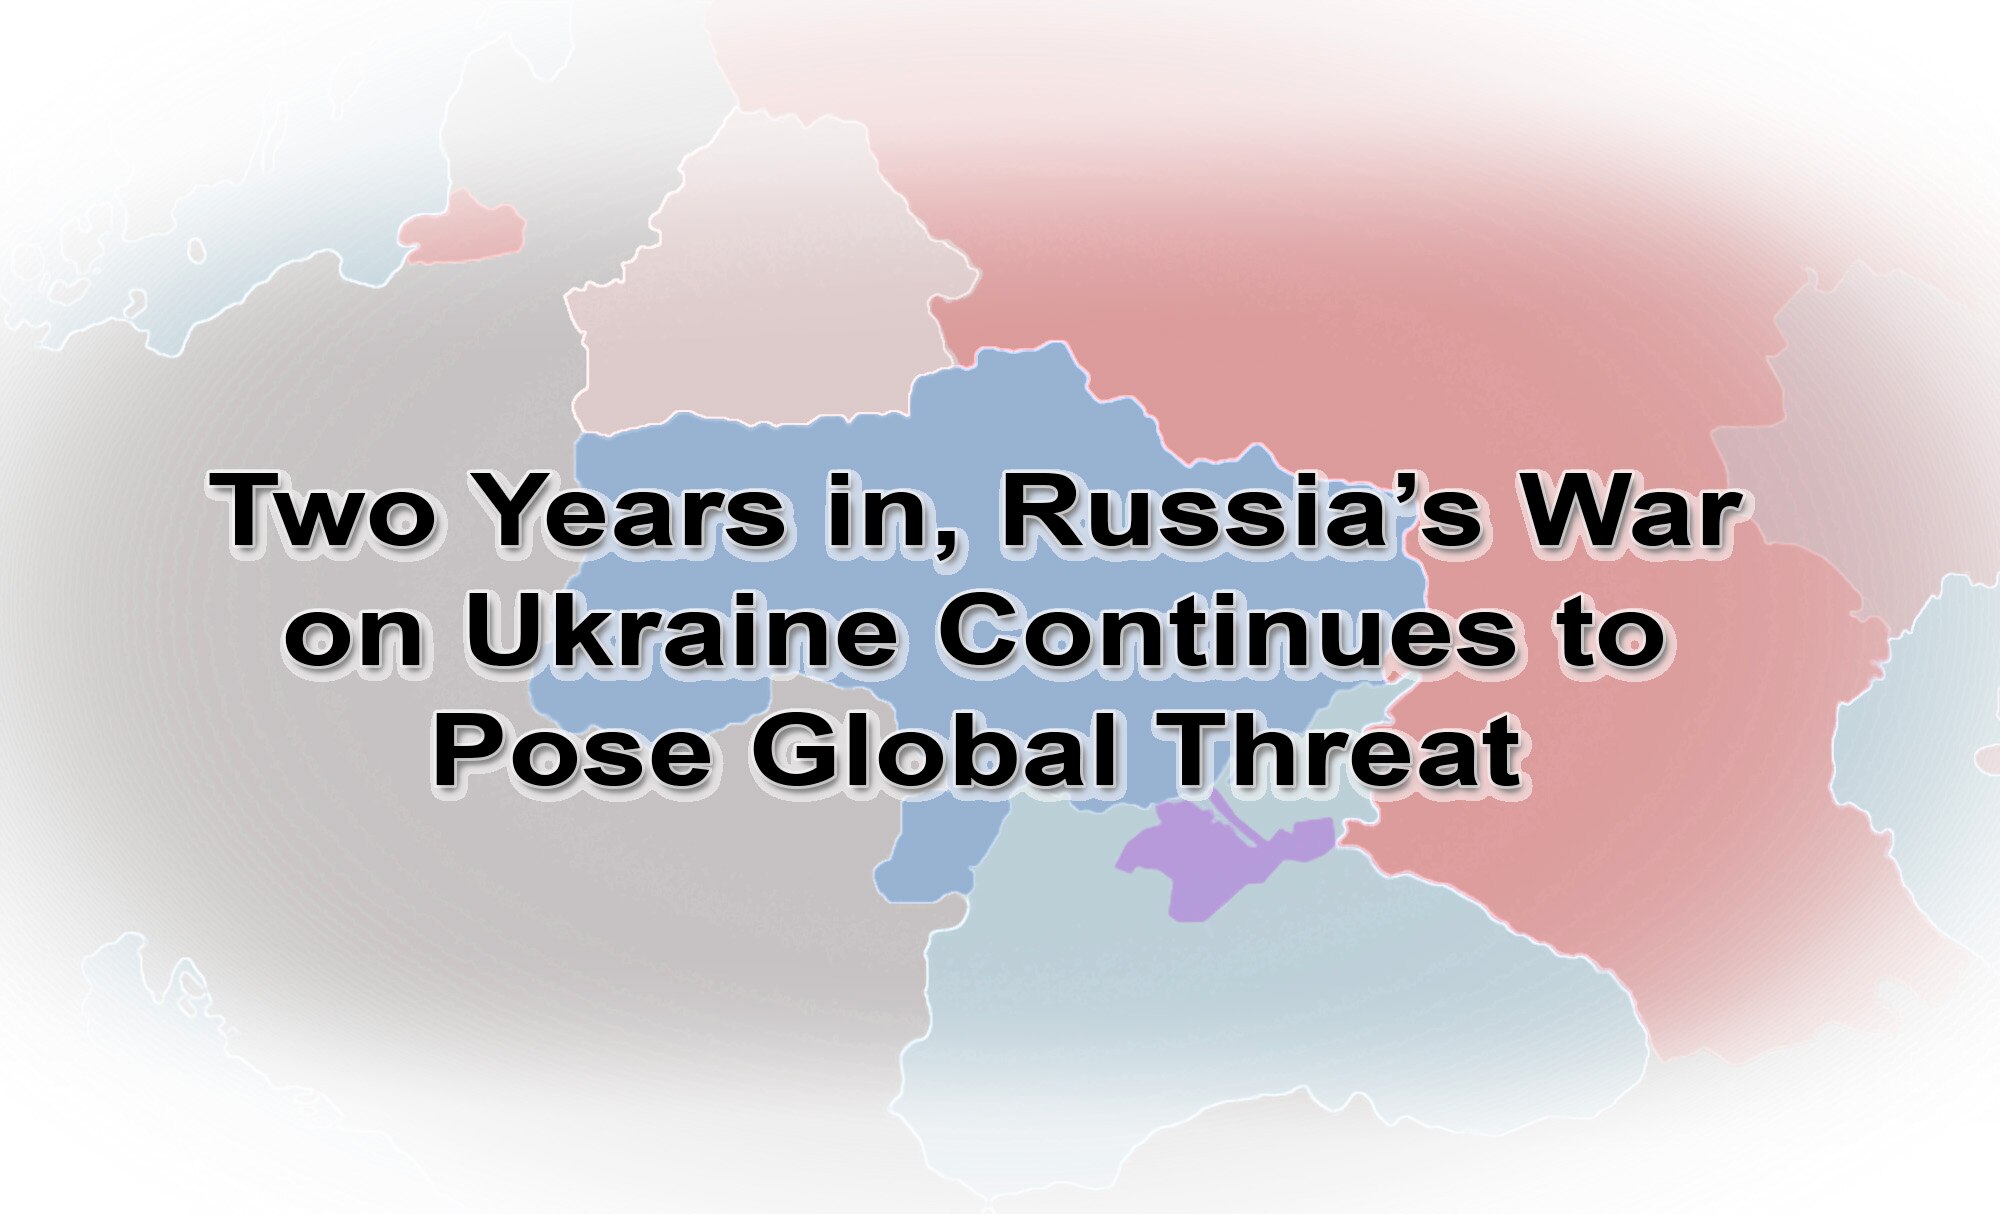 Russia's War on Ukraine Continues to Pose Threat to Global Security article cover graphic